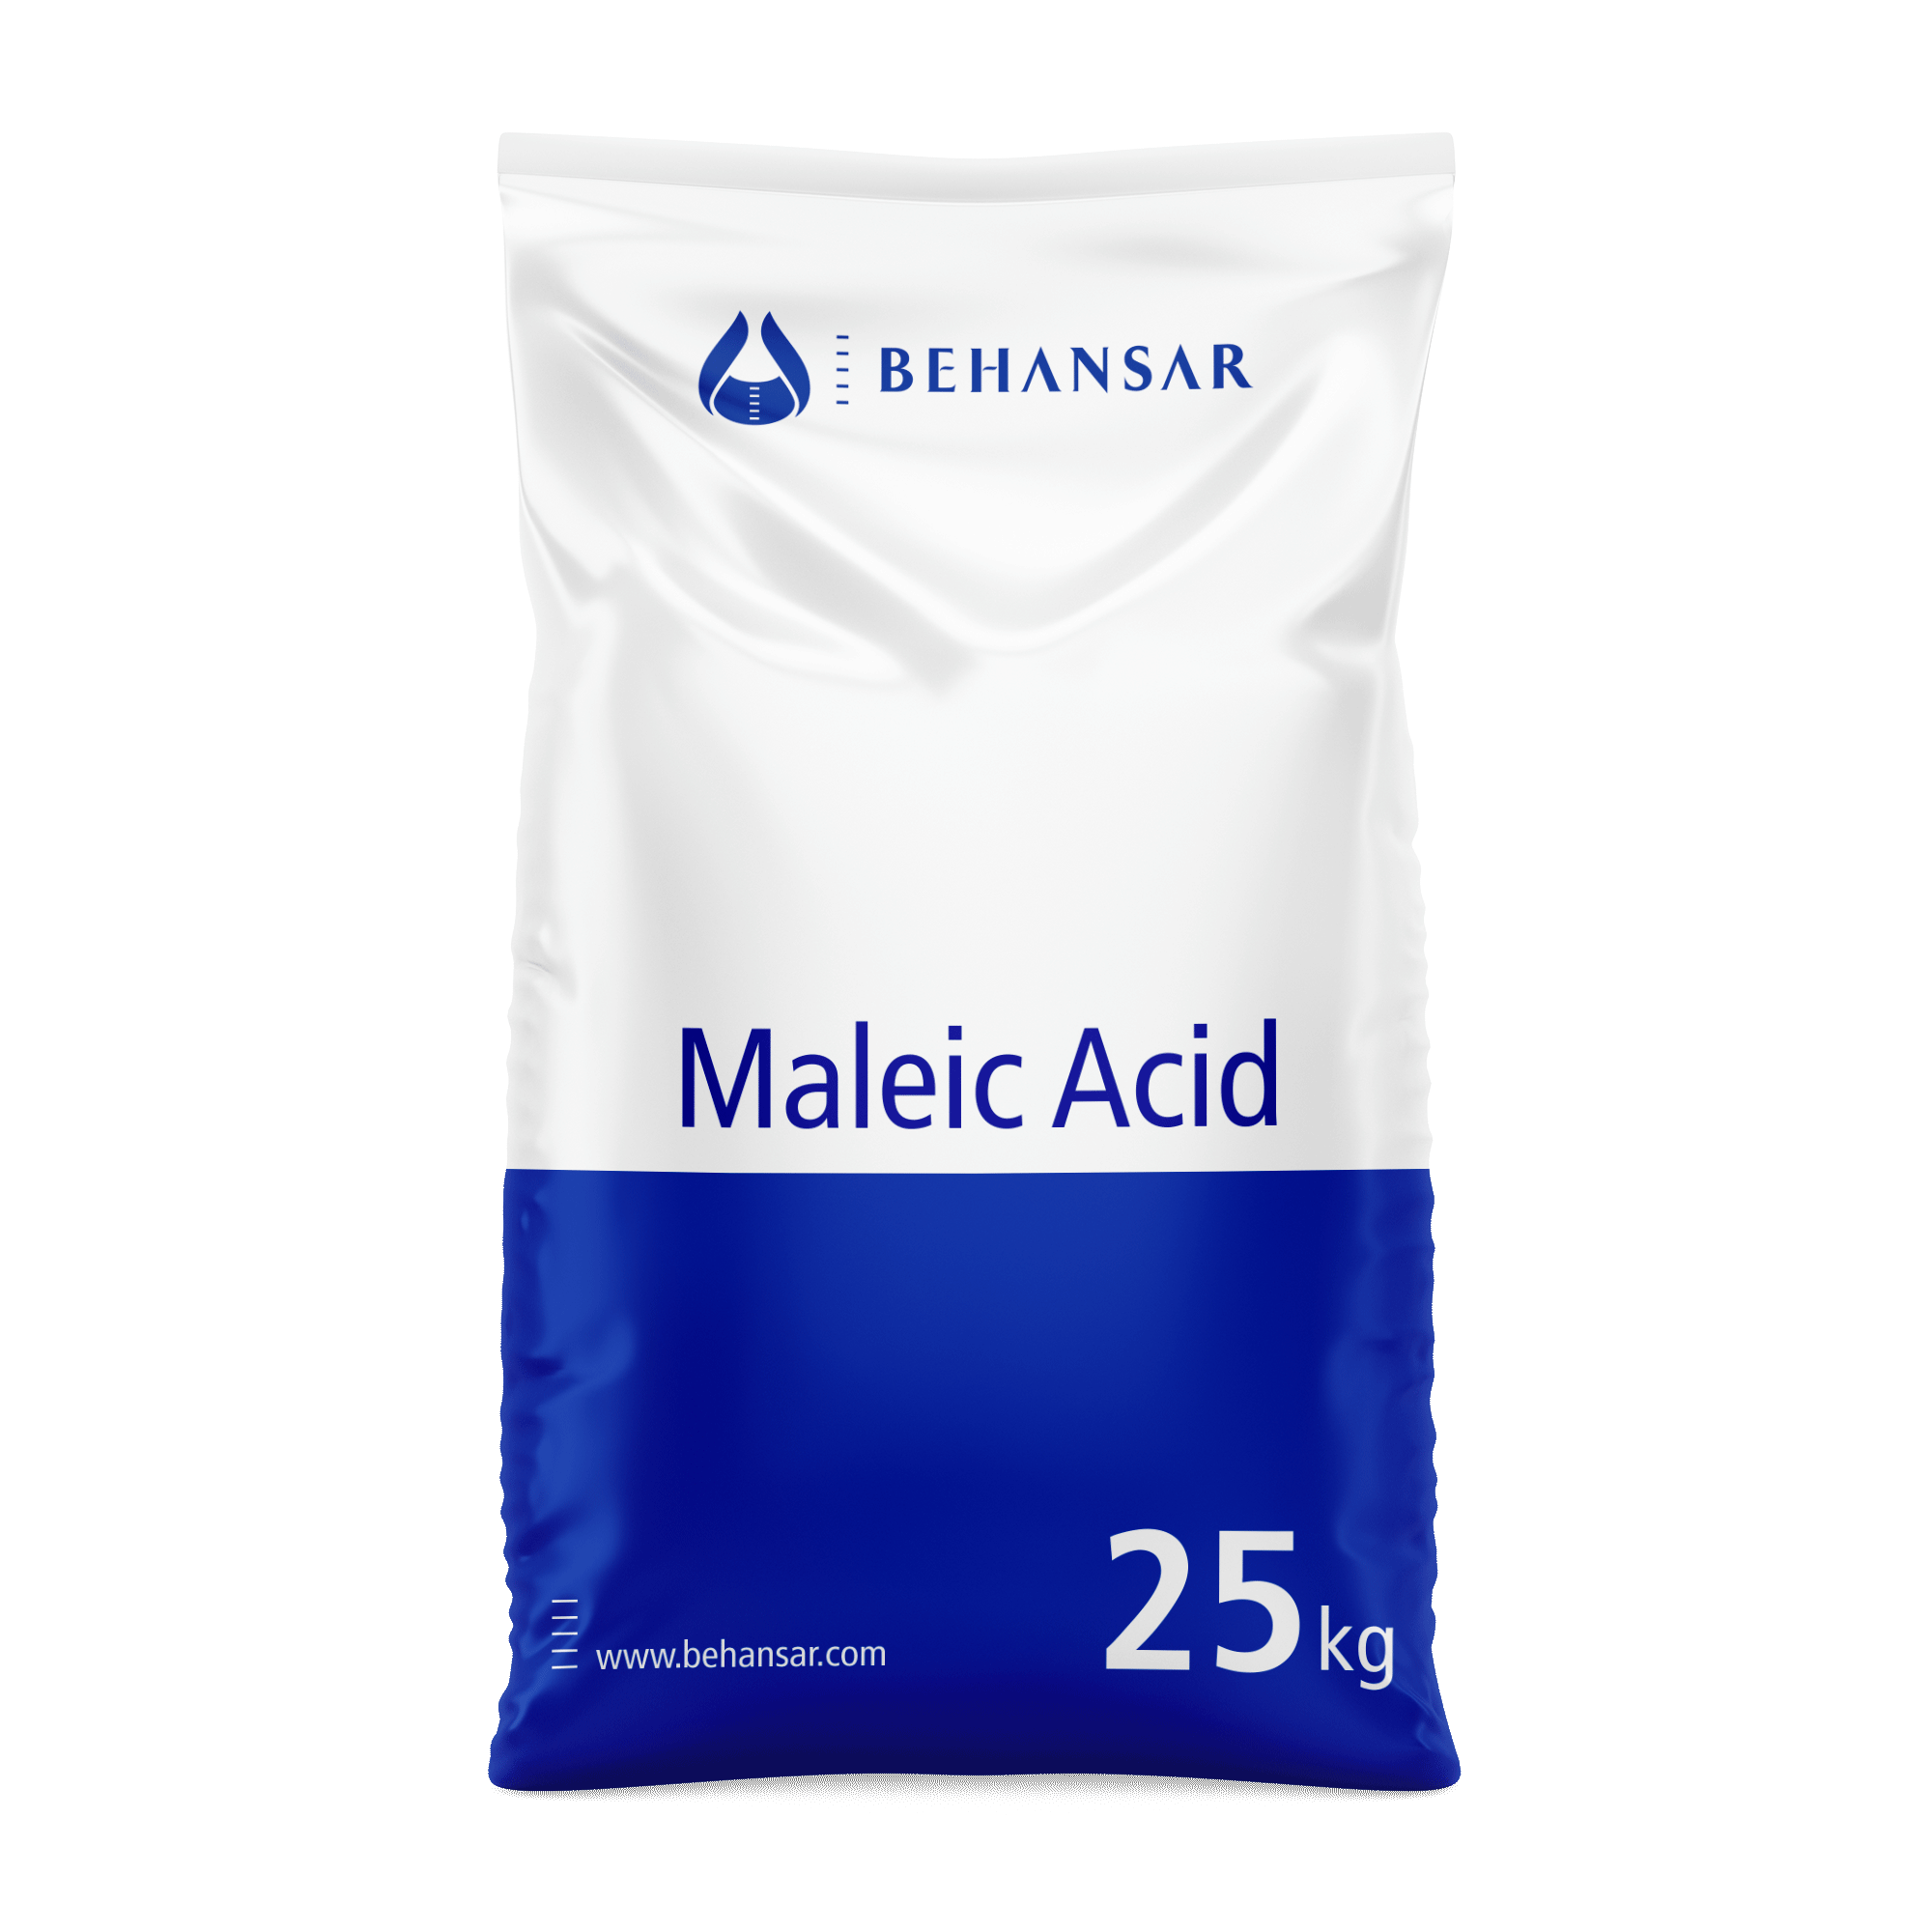 Maleic Acid is one of the products of Behansar Co